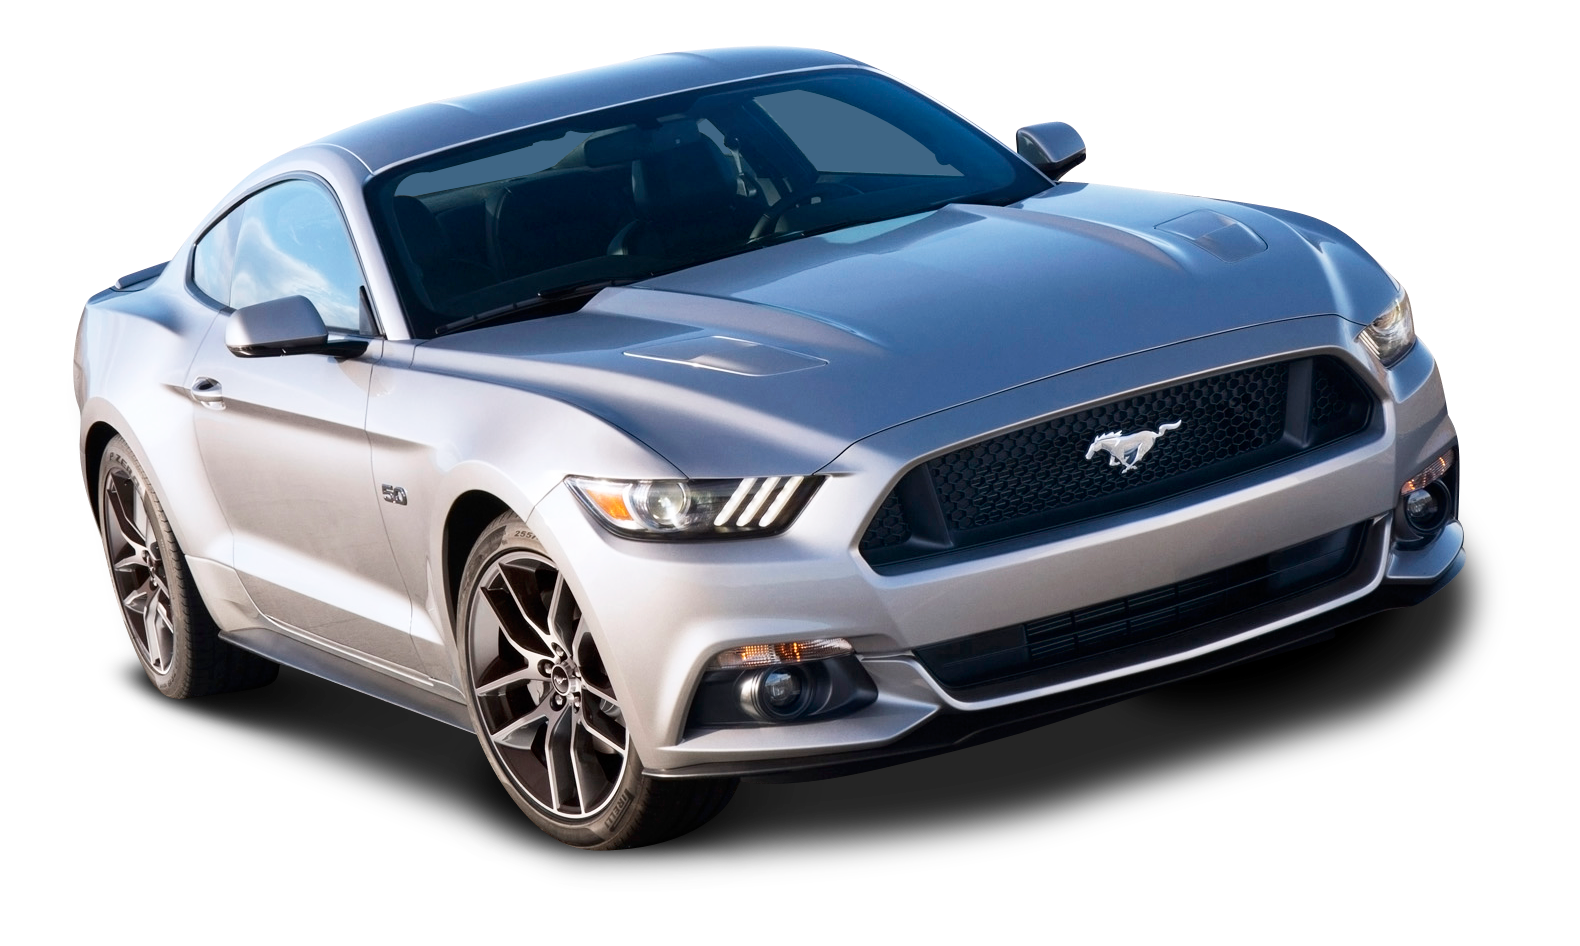 Ford Mustang Silver Car Png Image - Ford, Transparent background PNG HD thumbnail